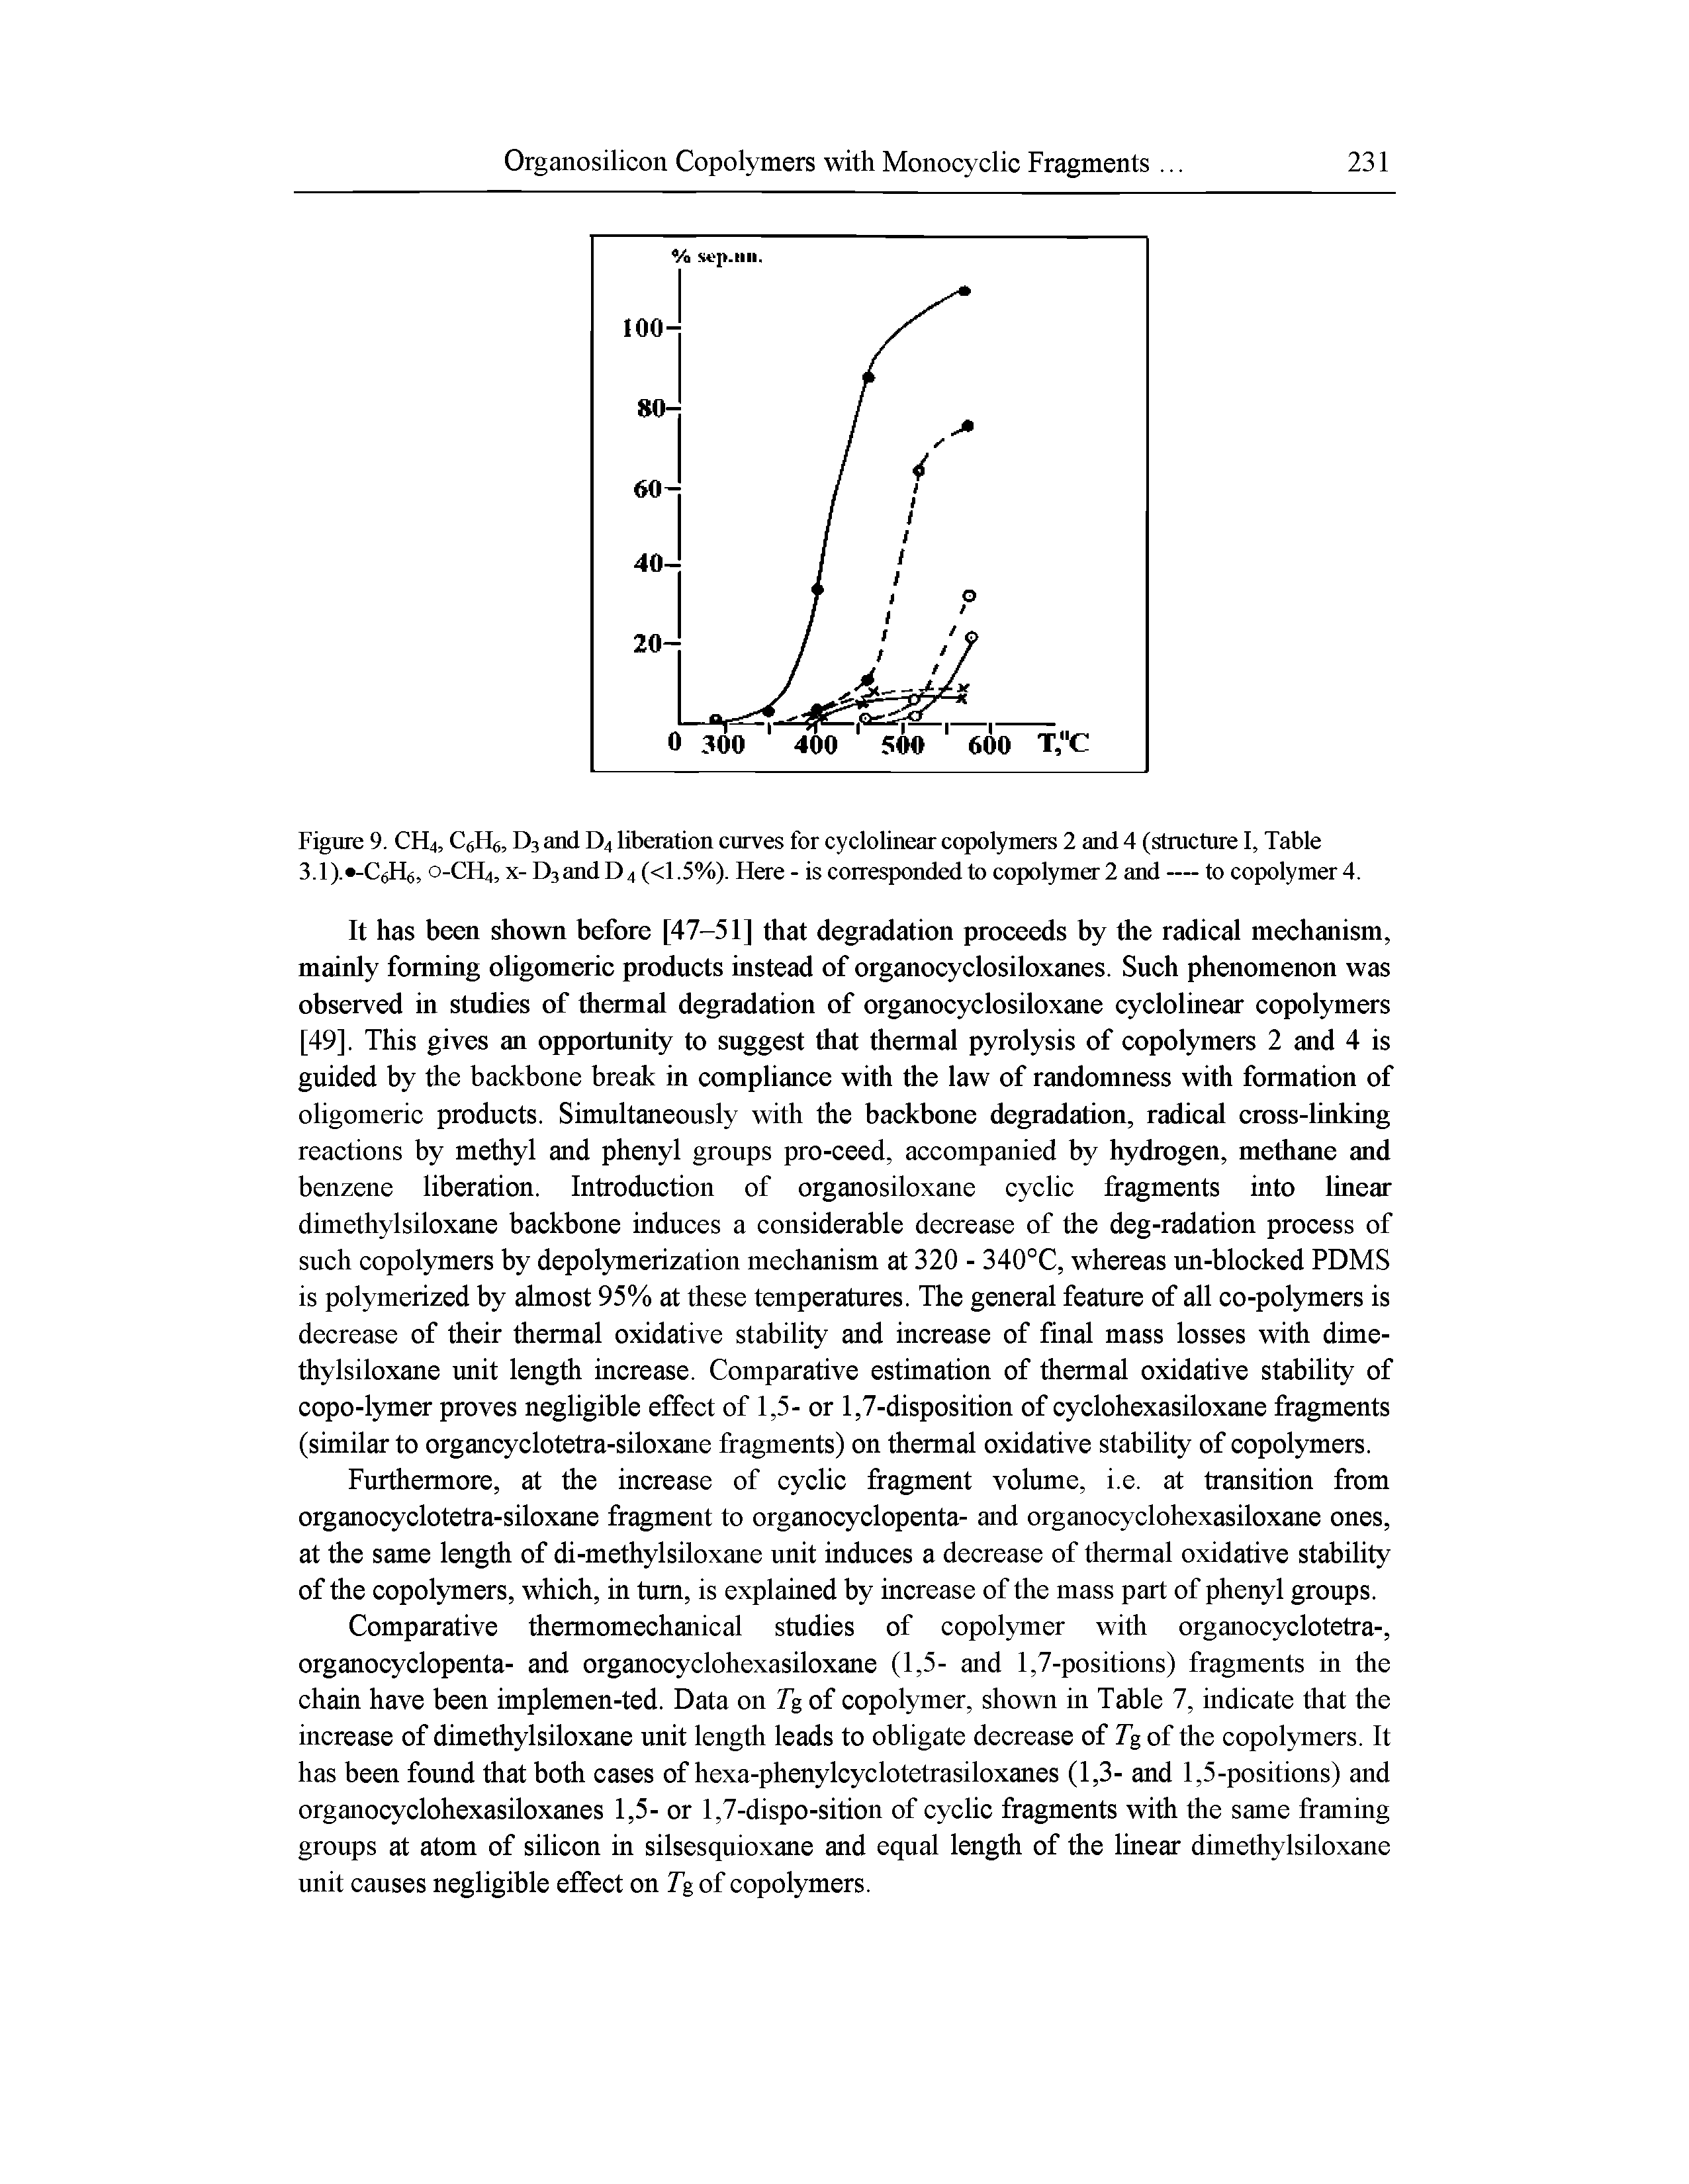 Figure 9. CH4, C6II6, D3 and D4 liberation curves for cyclolinear copolymers 2 and 4 (structure I, Table 3.1 ). -C0H0, 0-CH4, x- D3andD4 (<1.5%). Here - is corresponded to copolymer 2 and — to copolymer 4.